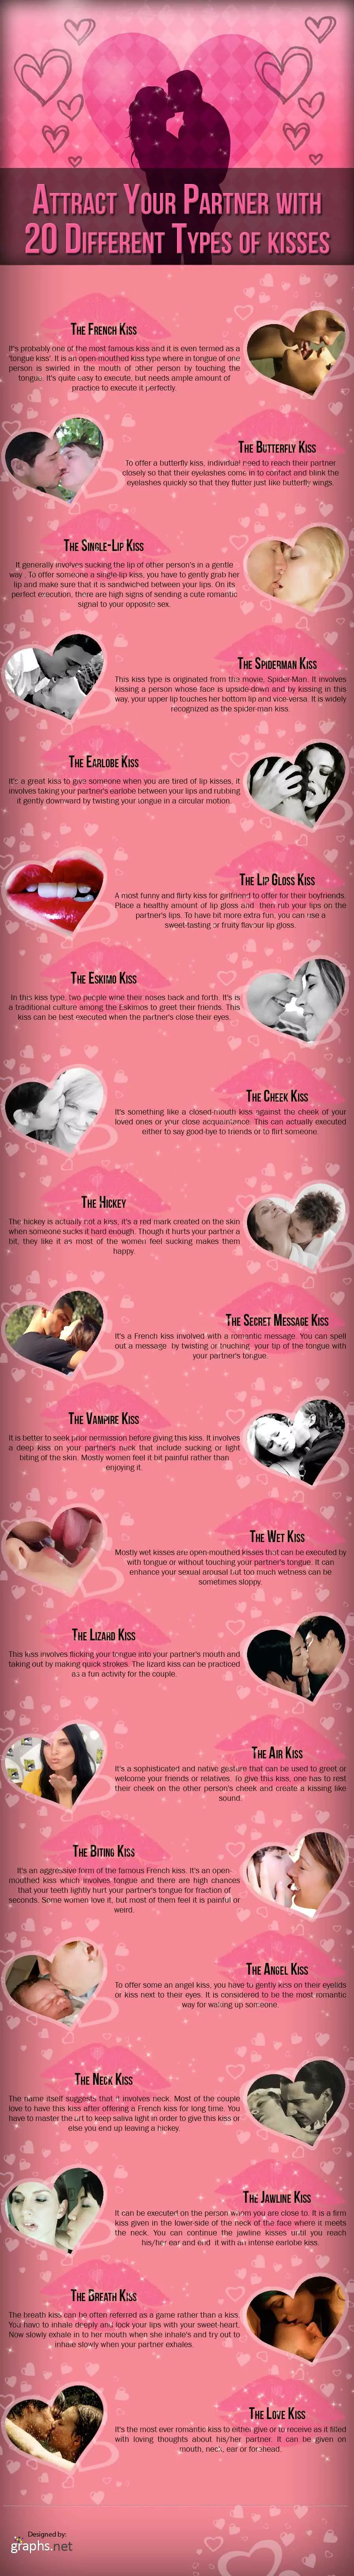 43. 20 Different Types Of Kisses - 50 Infographics about Love You Must